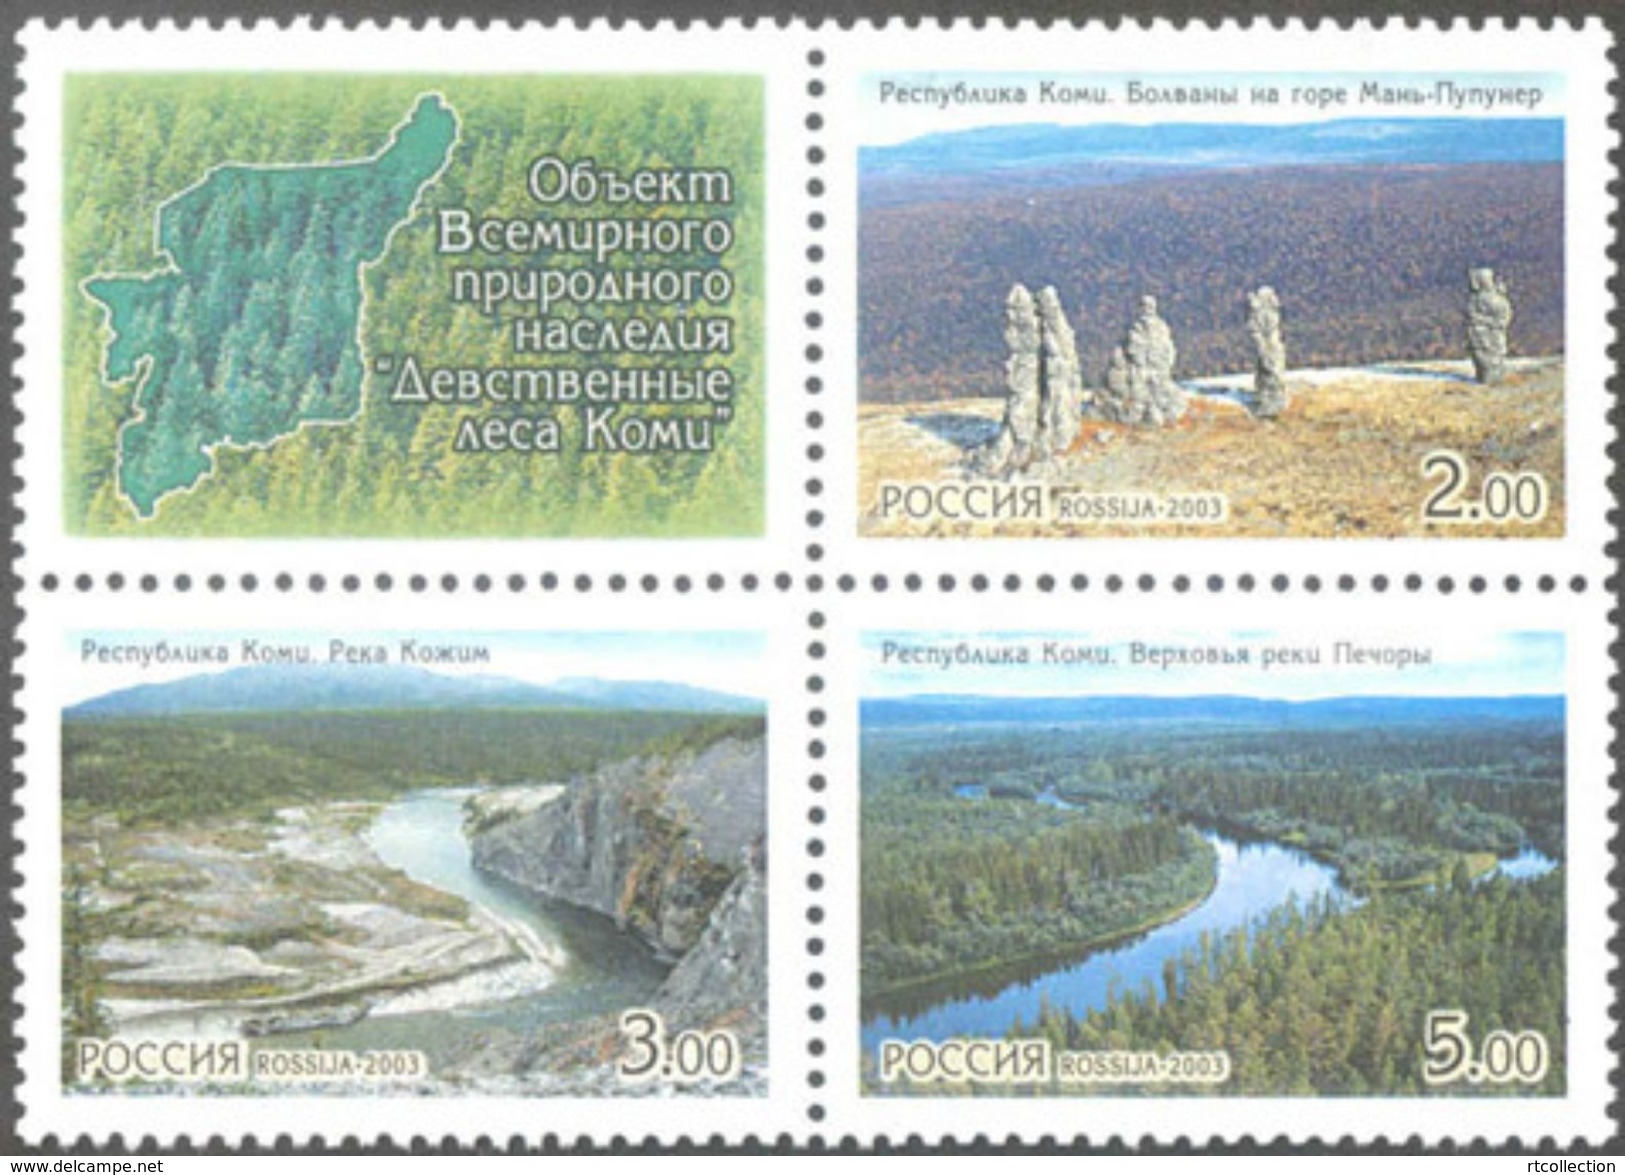 Russia 2003 Block World Natural Heritage Virgin Forest Komi Geography Nature River Mountain Places Stamps Mi 1096-1098Zf - Sammlungen